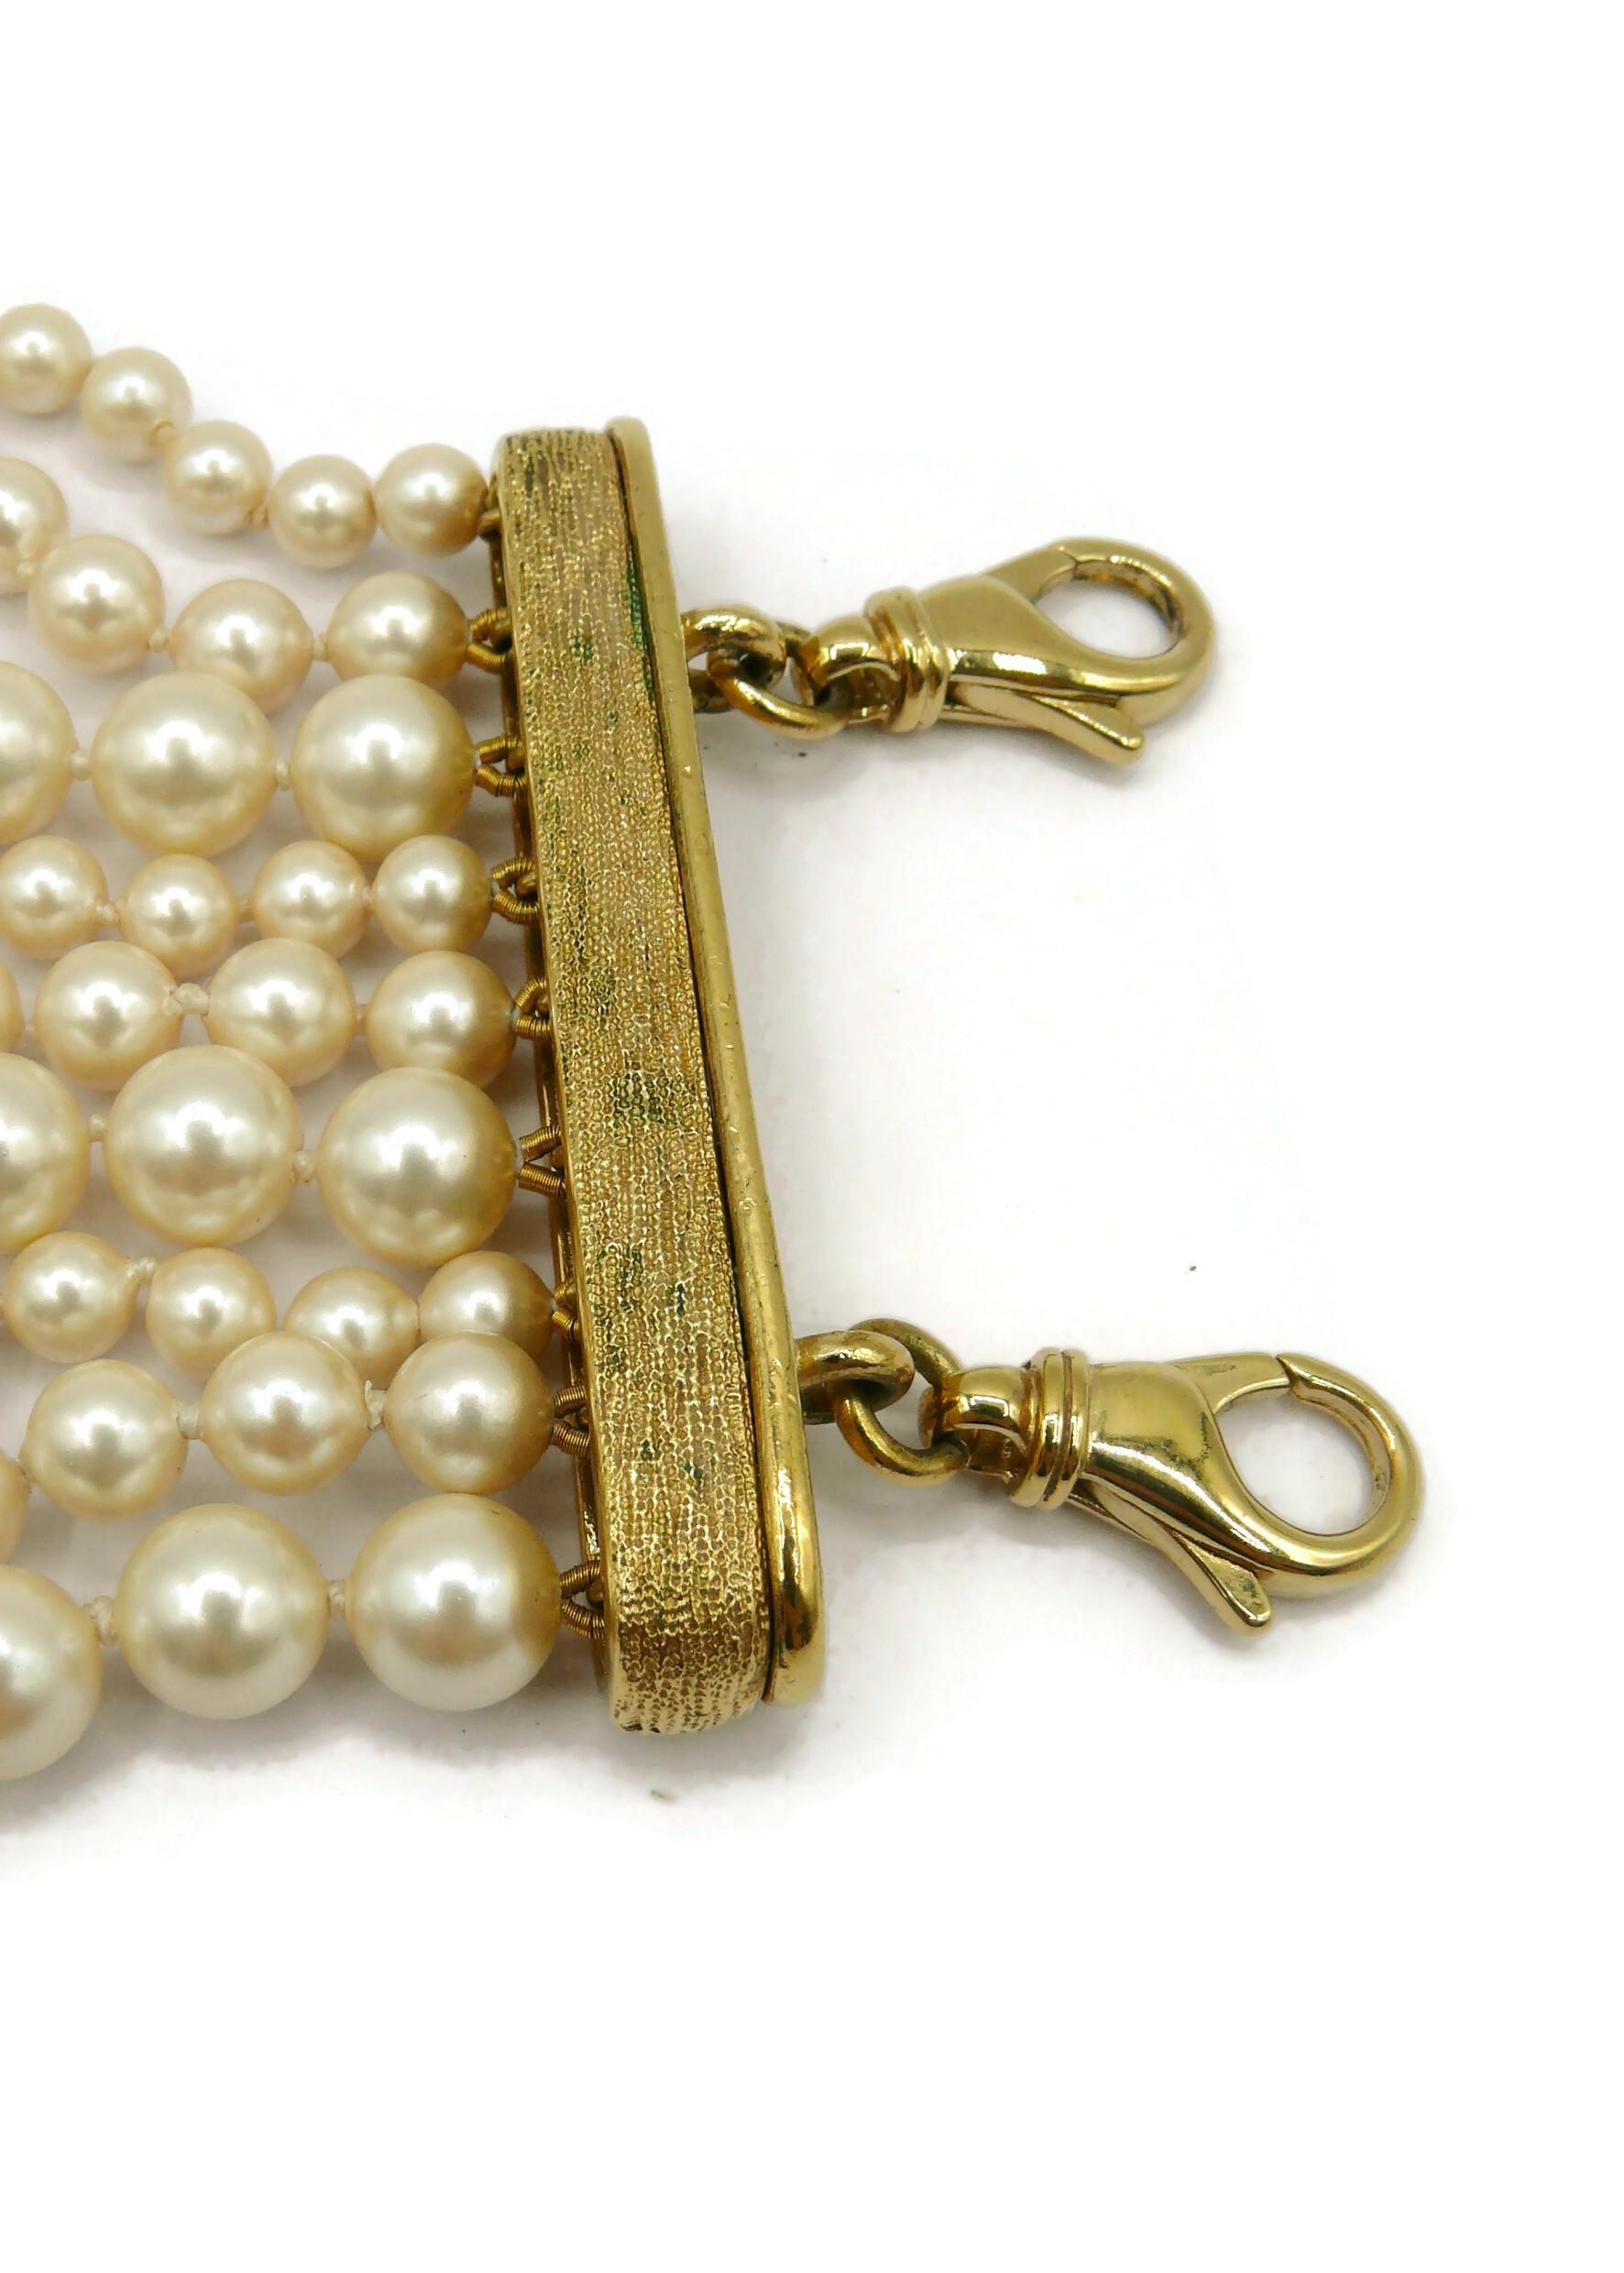 CHRISTIAN DIOR Vintage Multi-Strand Faux Pearl Necklace For Sale 11